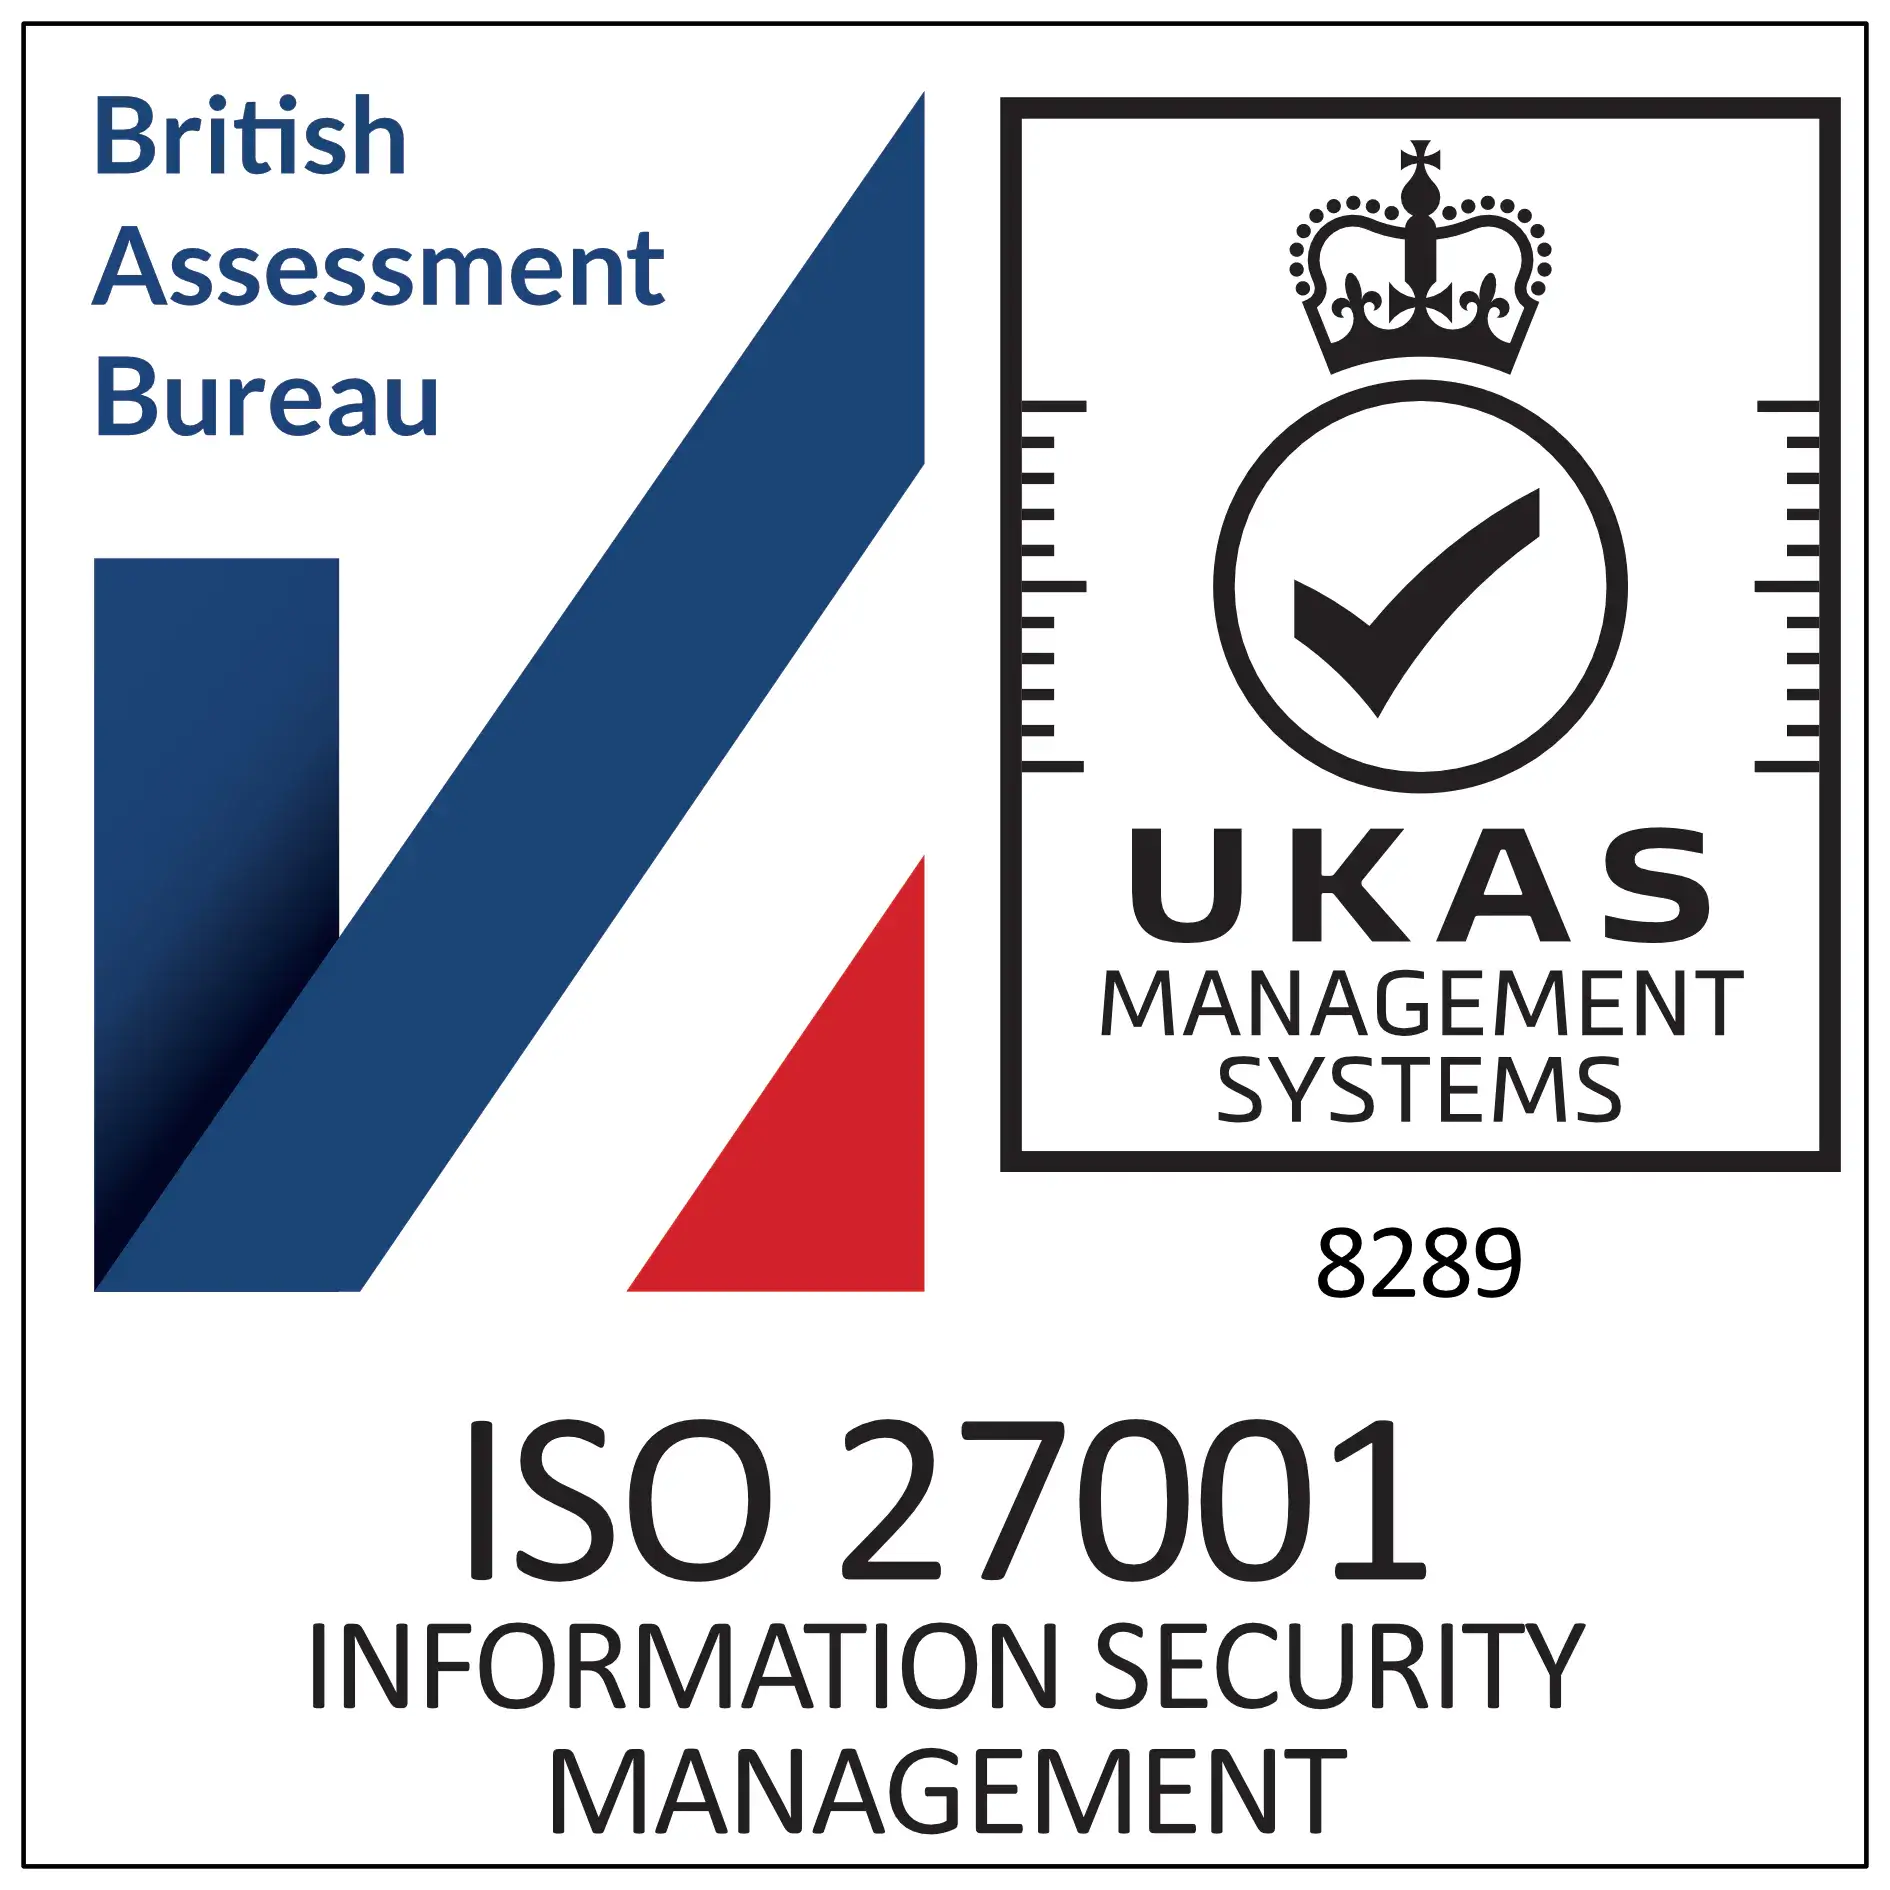 ISO 27001 Certificate from British Assessment Bureau